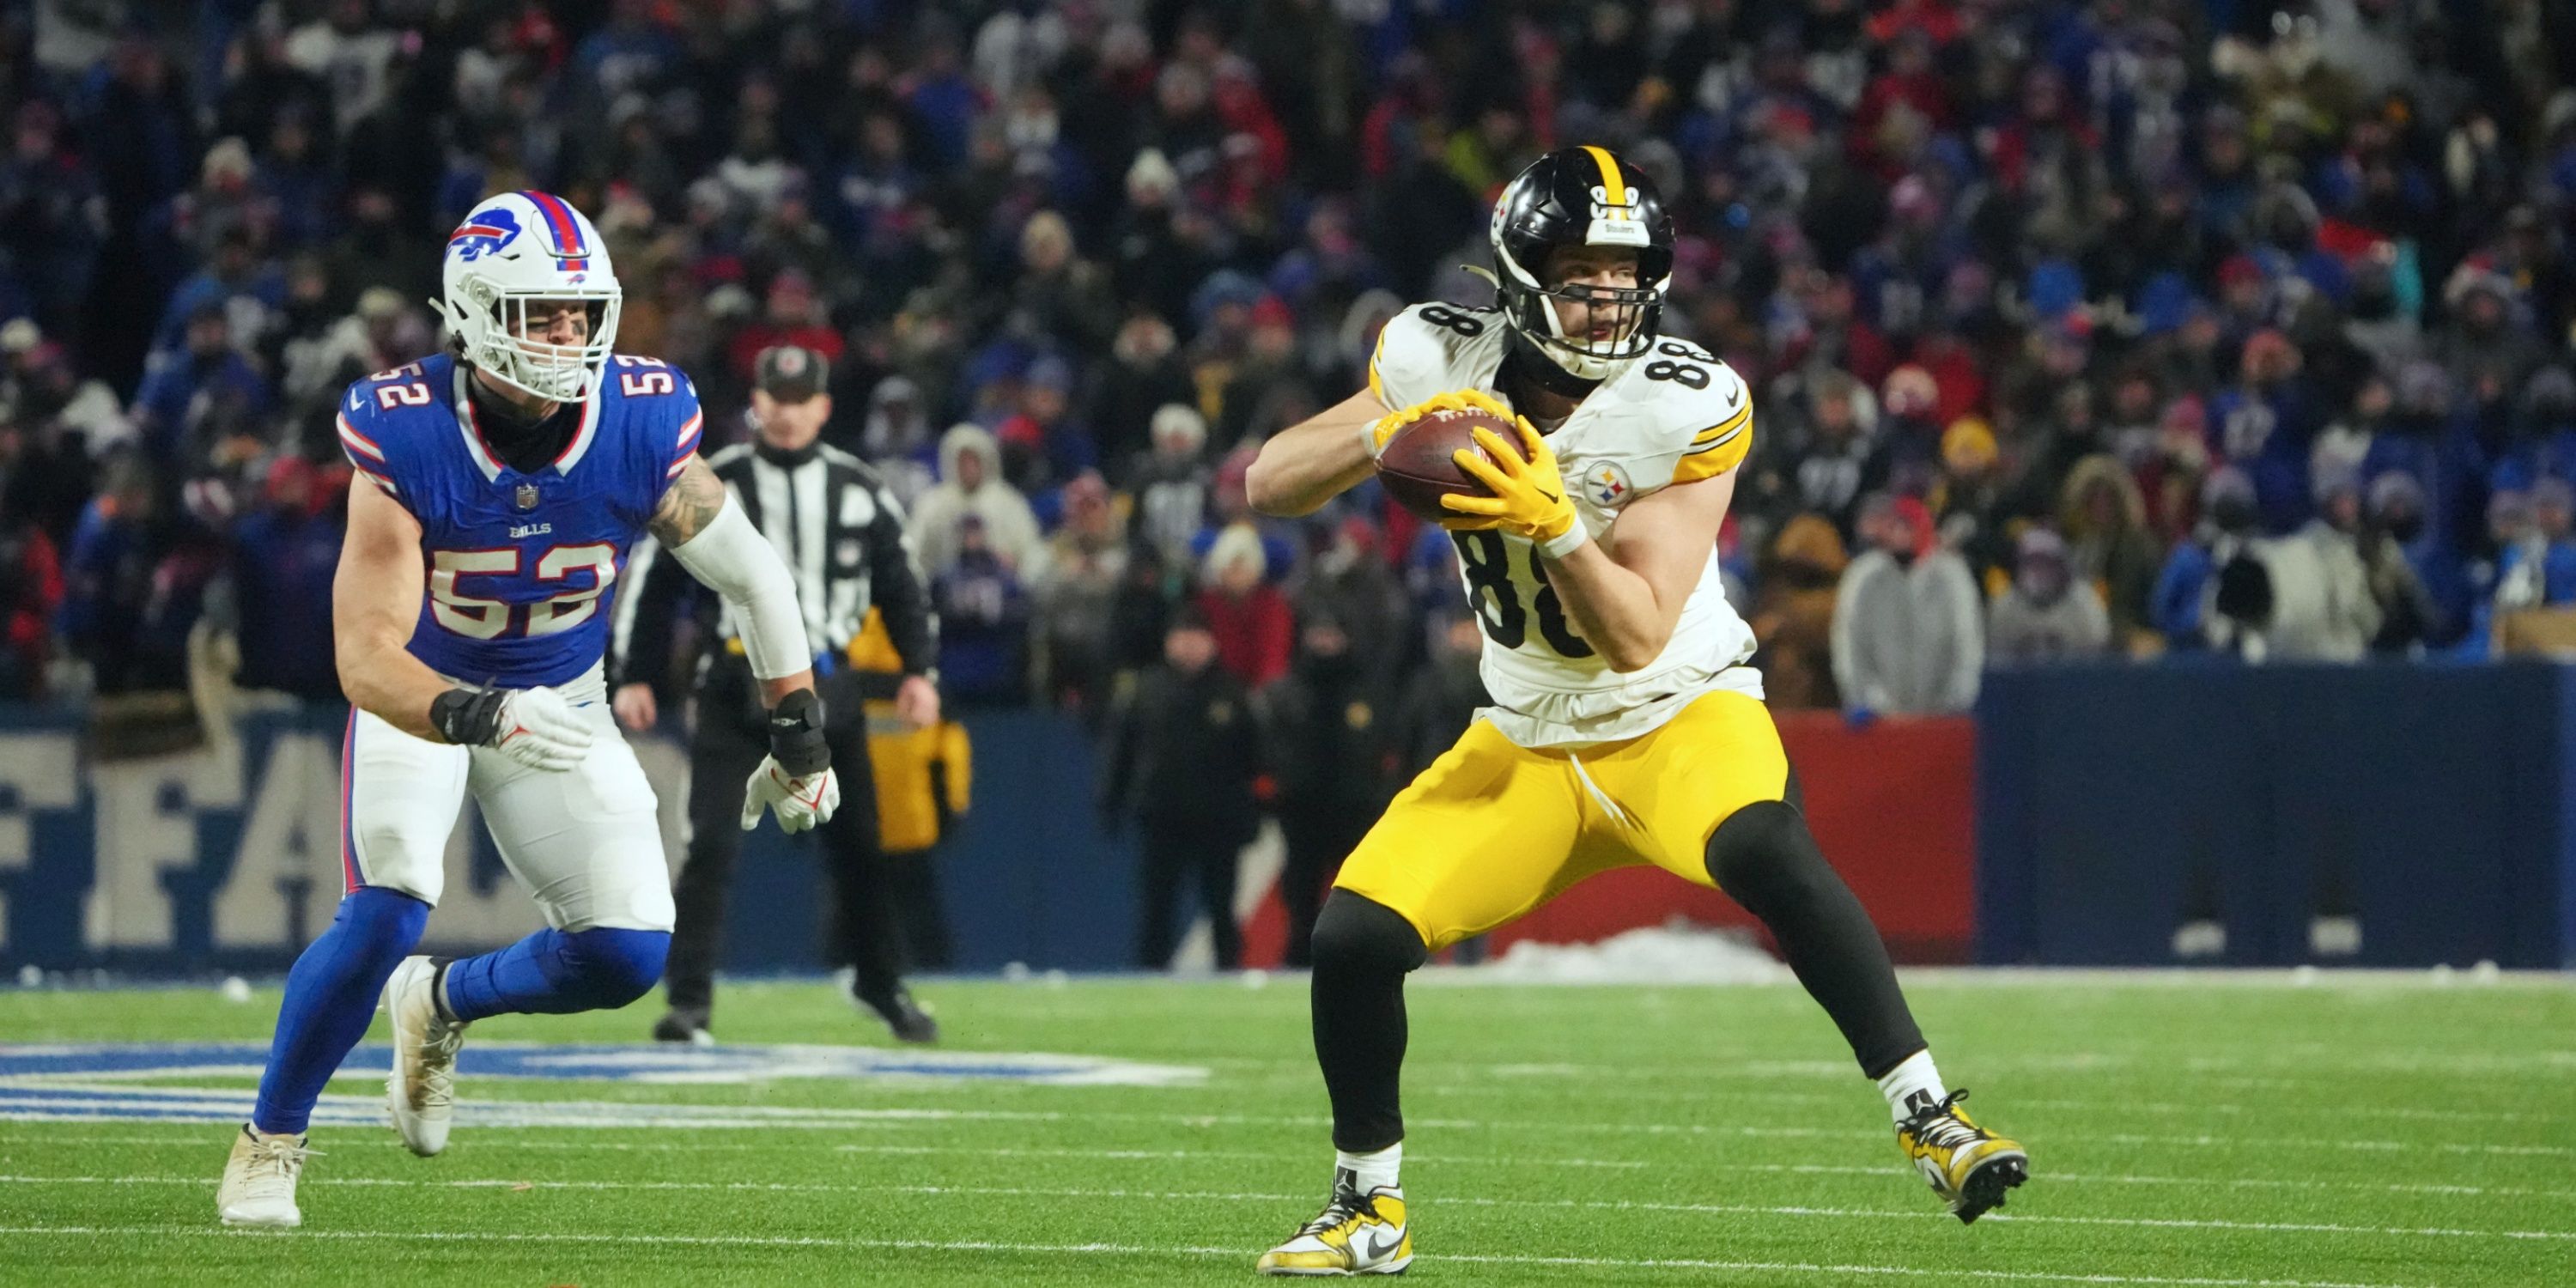 Steelers TE Pat Freiermuth catches pass in playoff game.